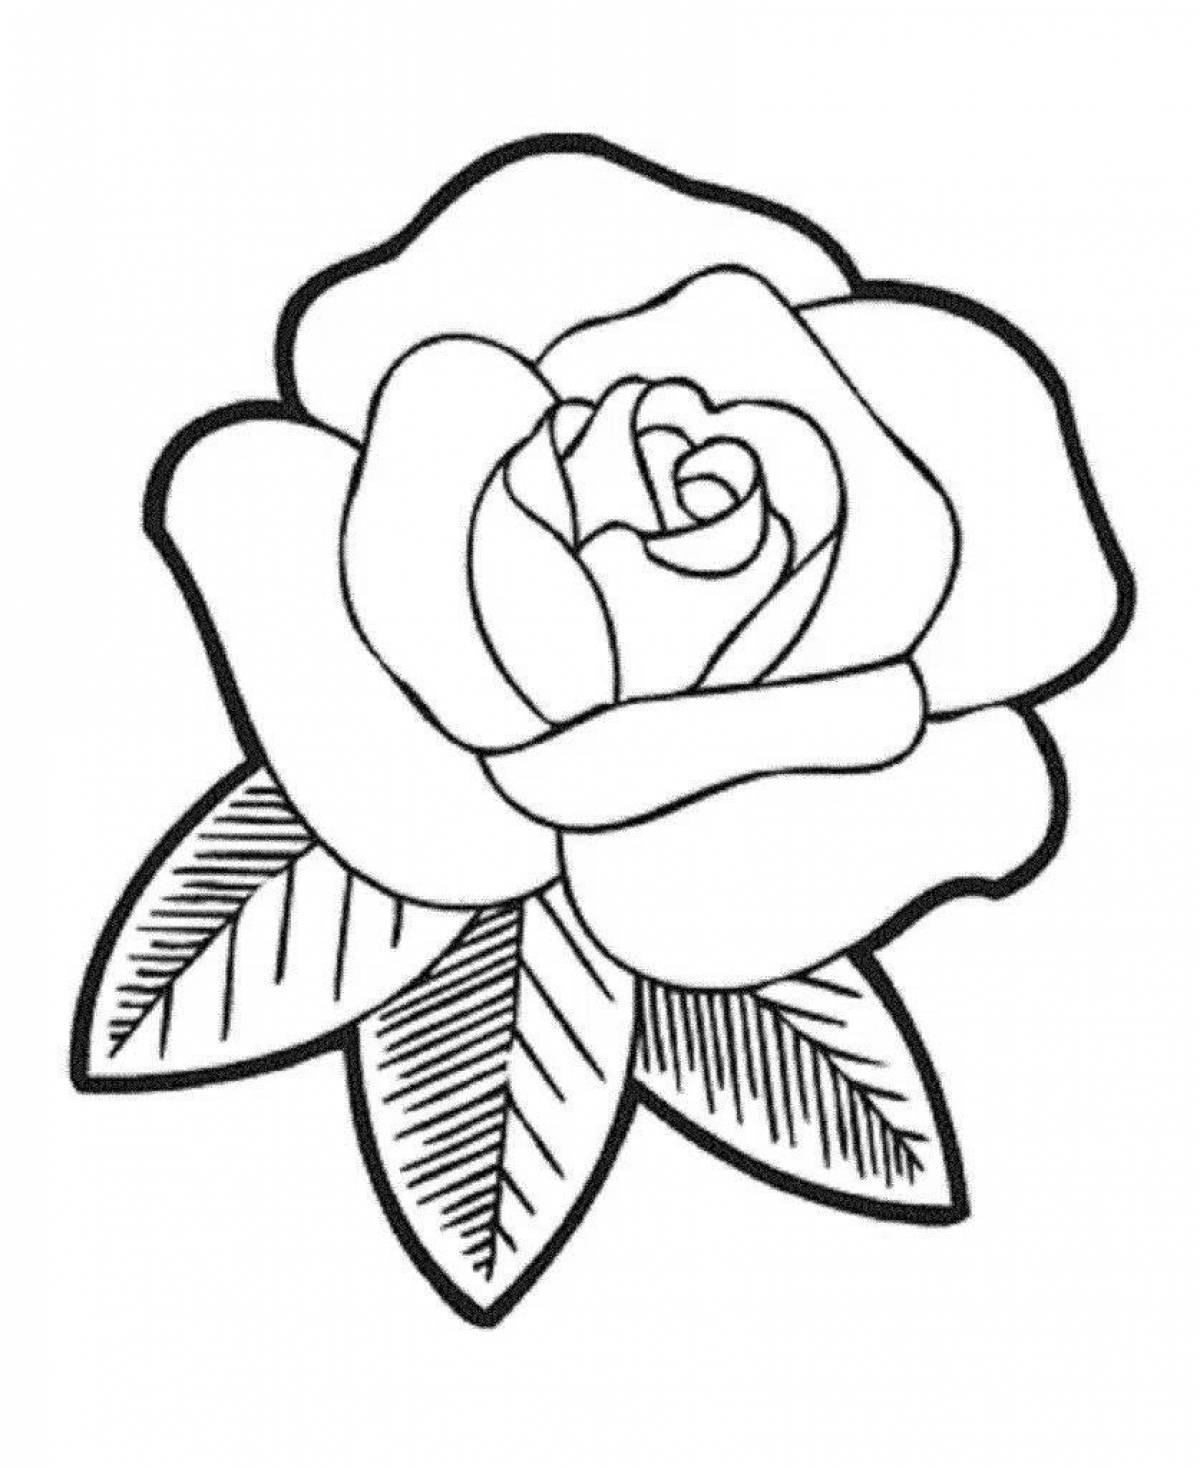 Coloring book luxury rose